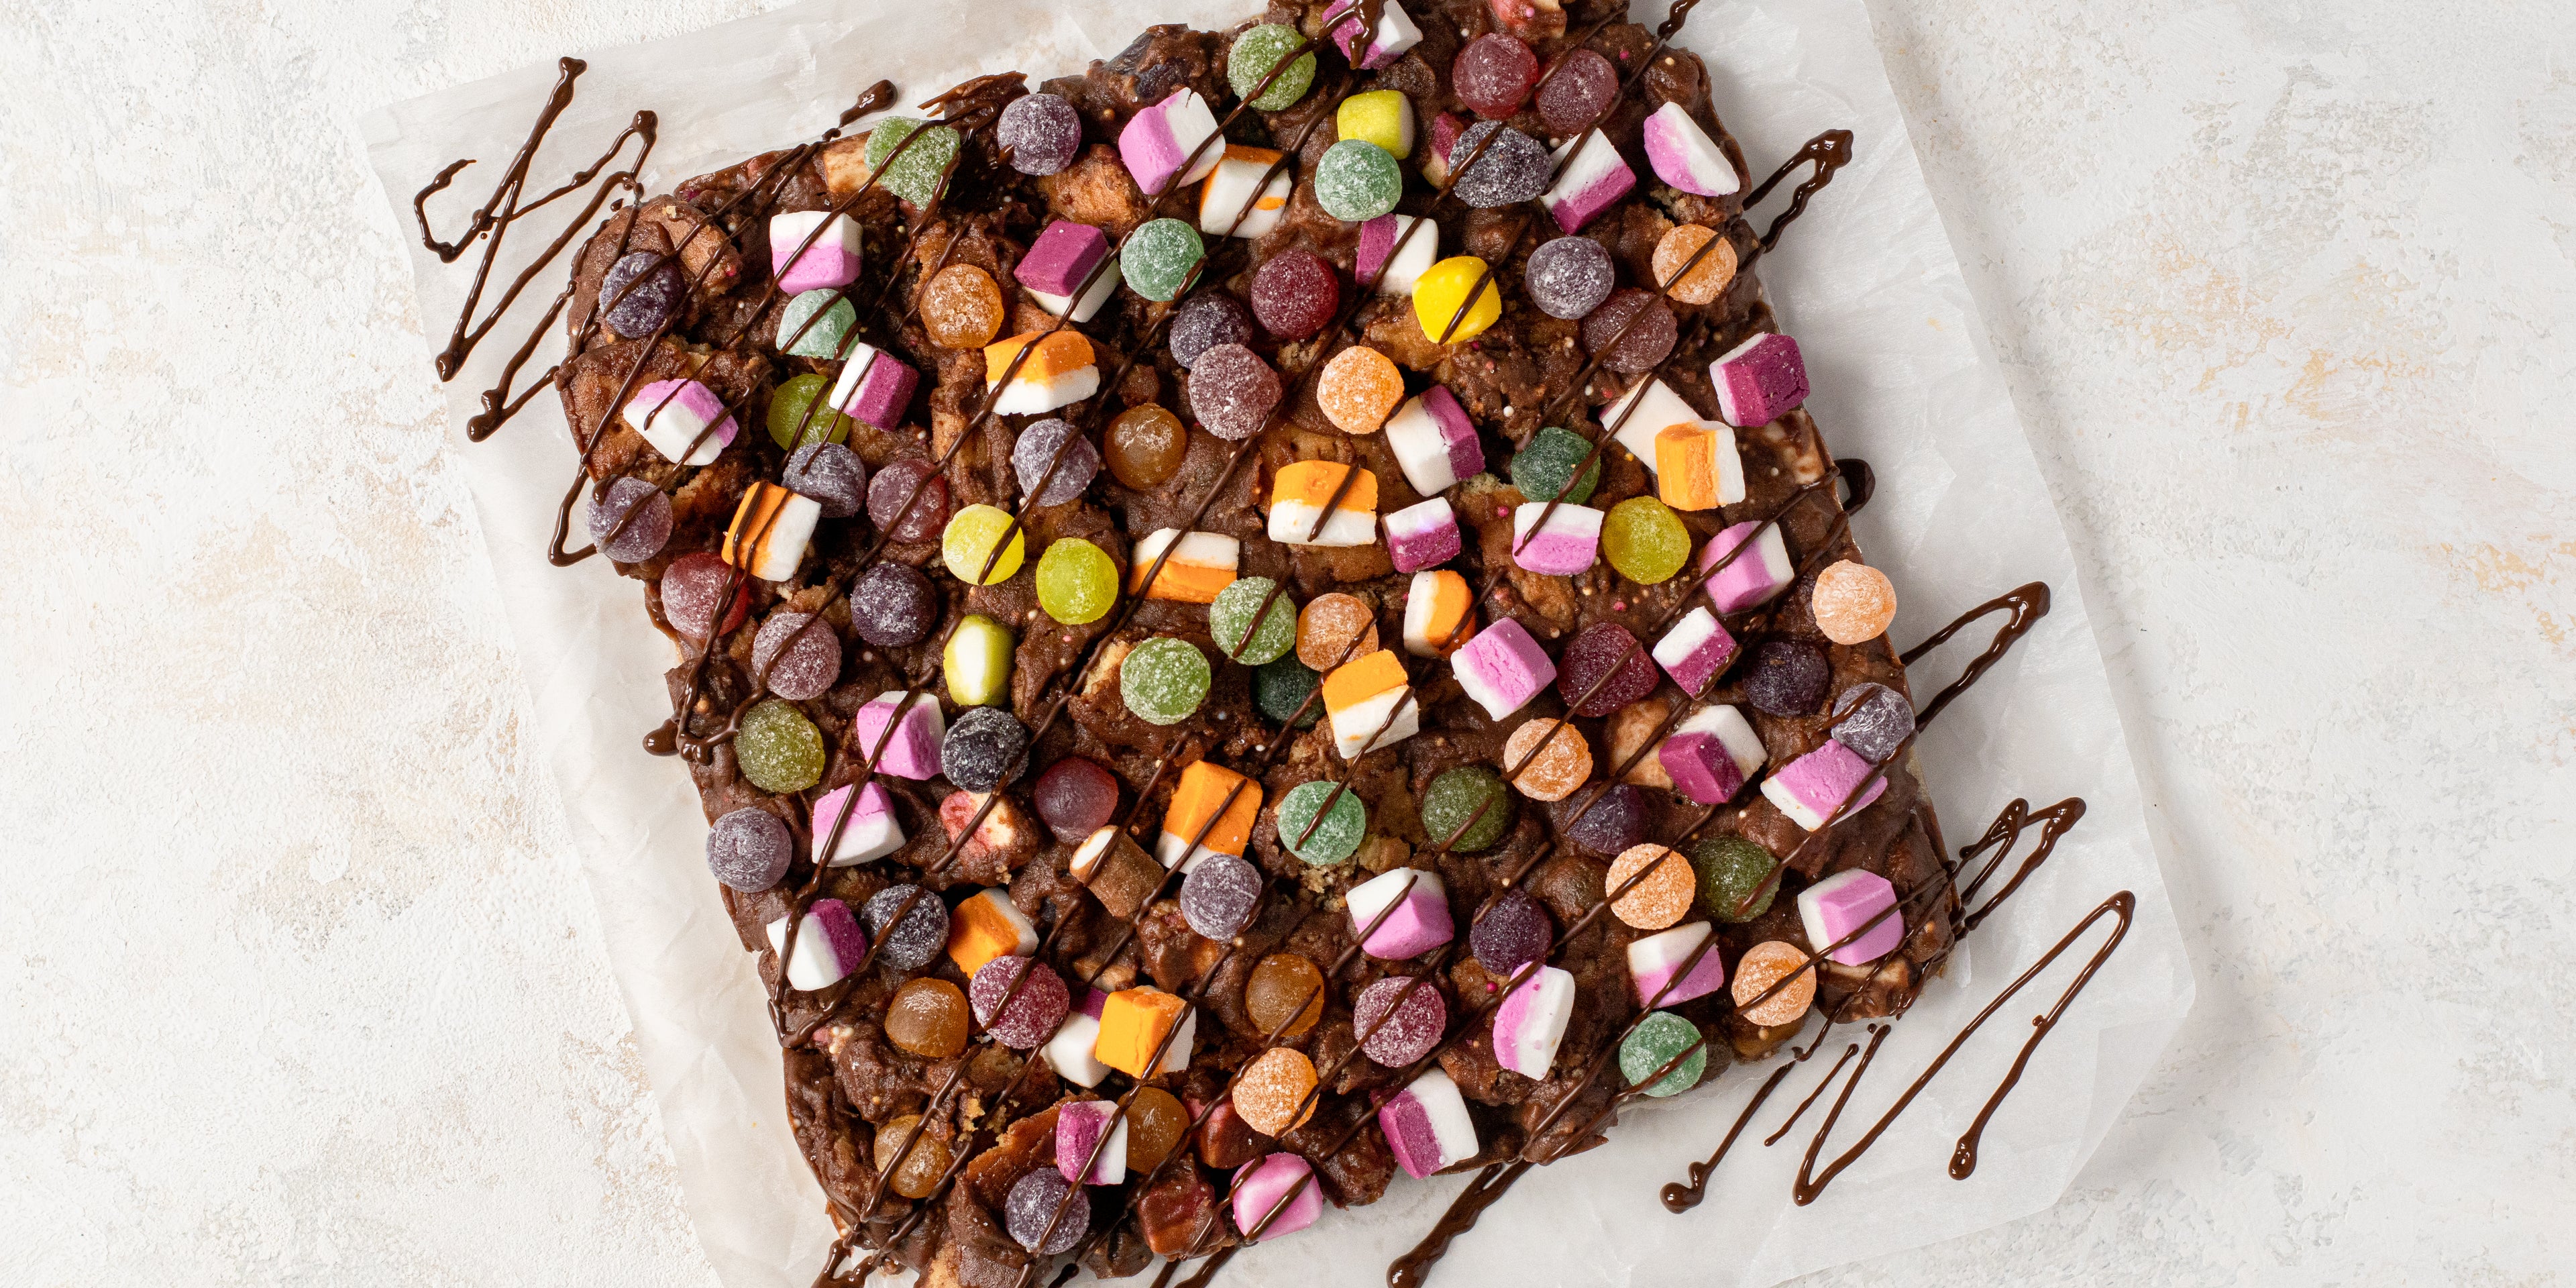 Top view of Sweetie Rocky Road on a sheet of baking paper, drizzled with chocolate